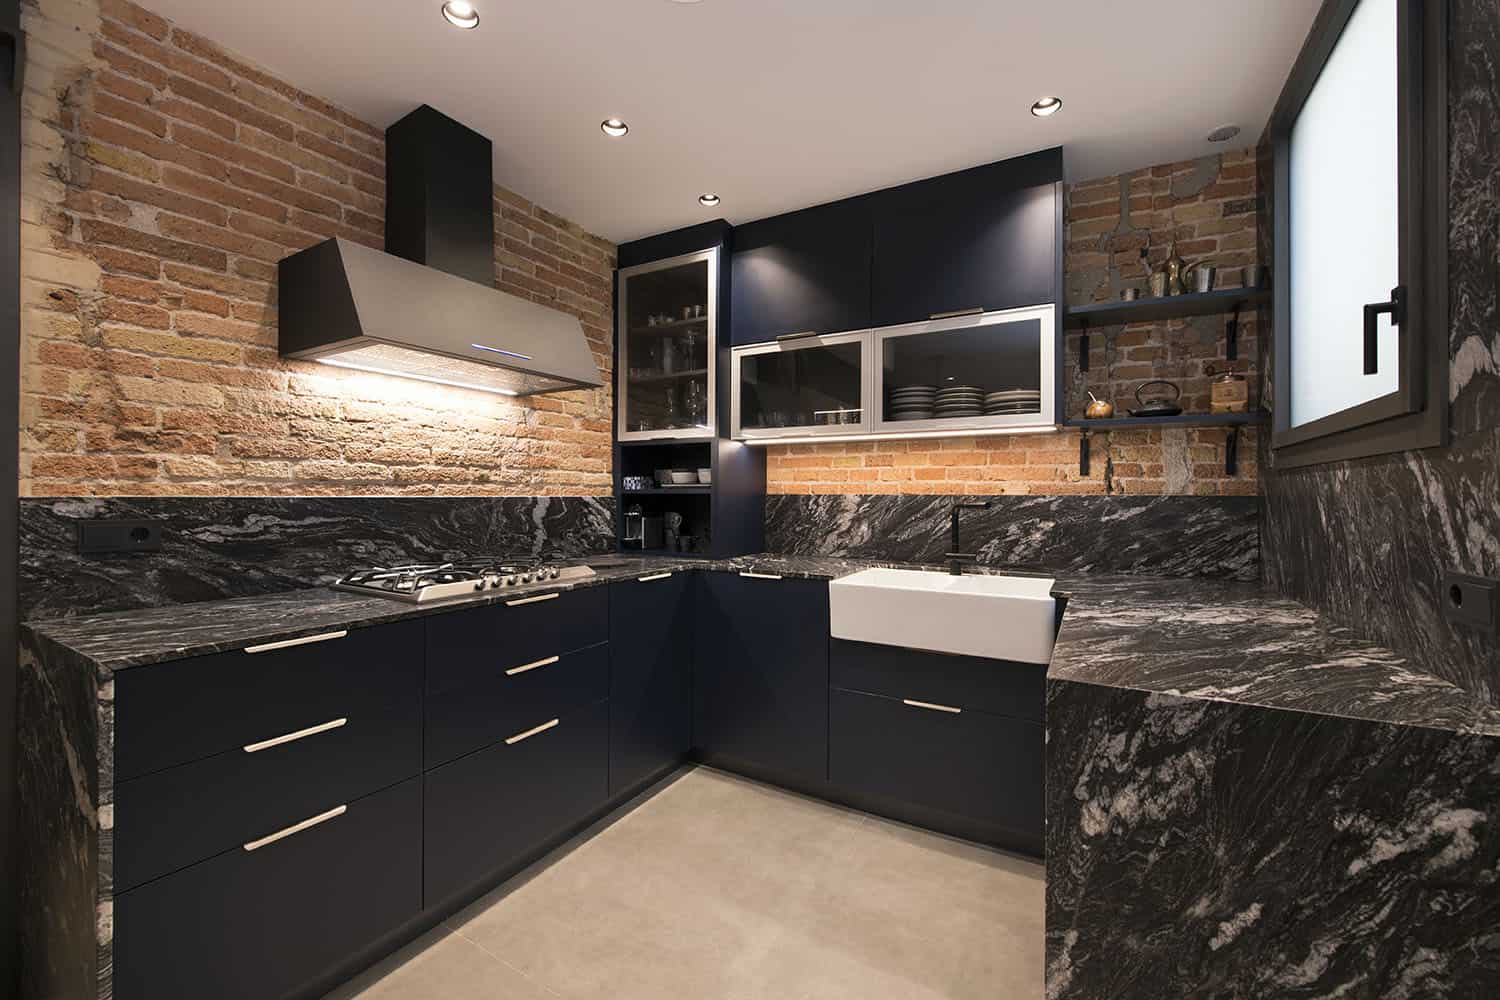 02 The kitchen is all industrial, with black cabinetry, black marble countertops and backsplashes, red brick walls